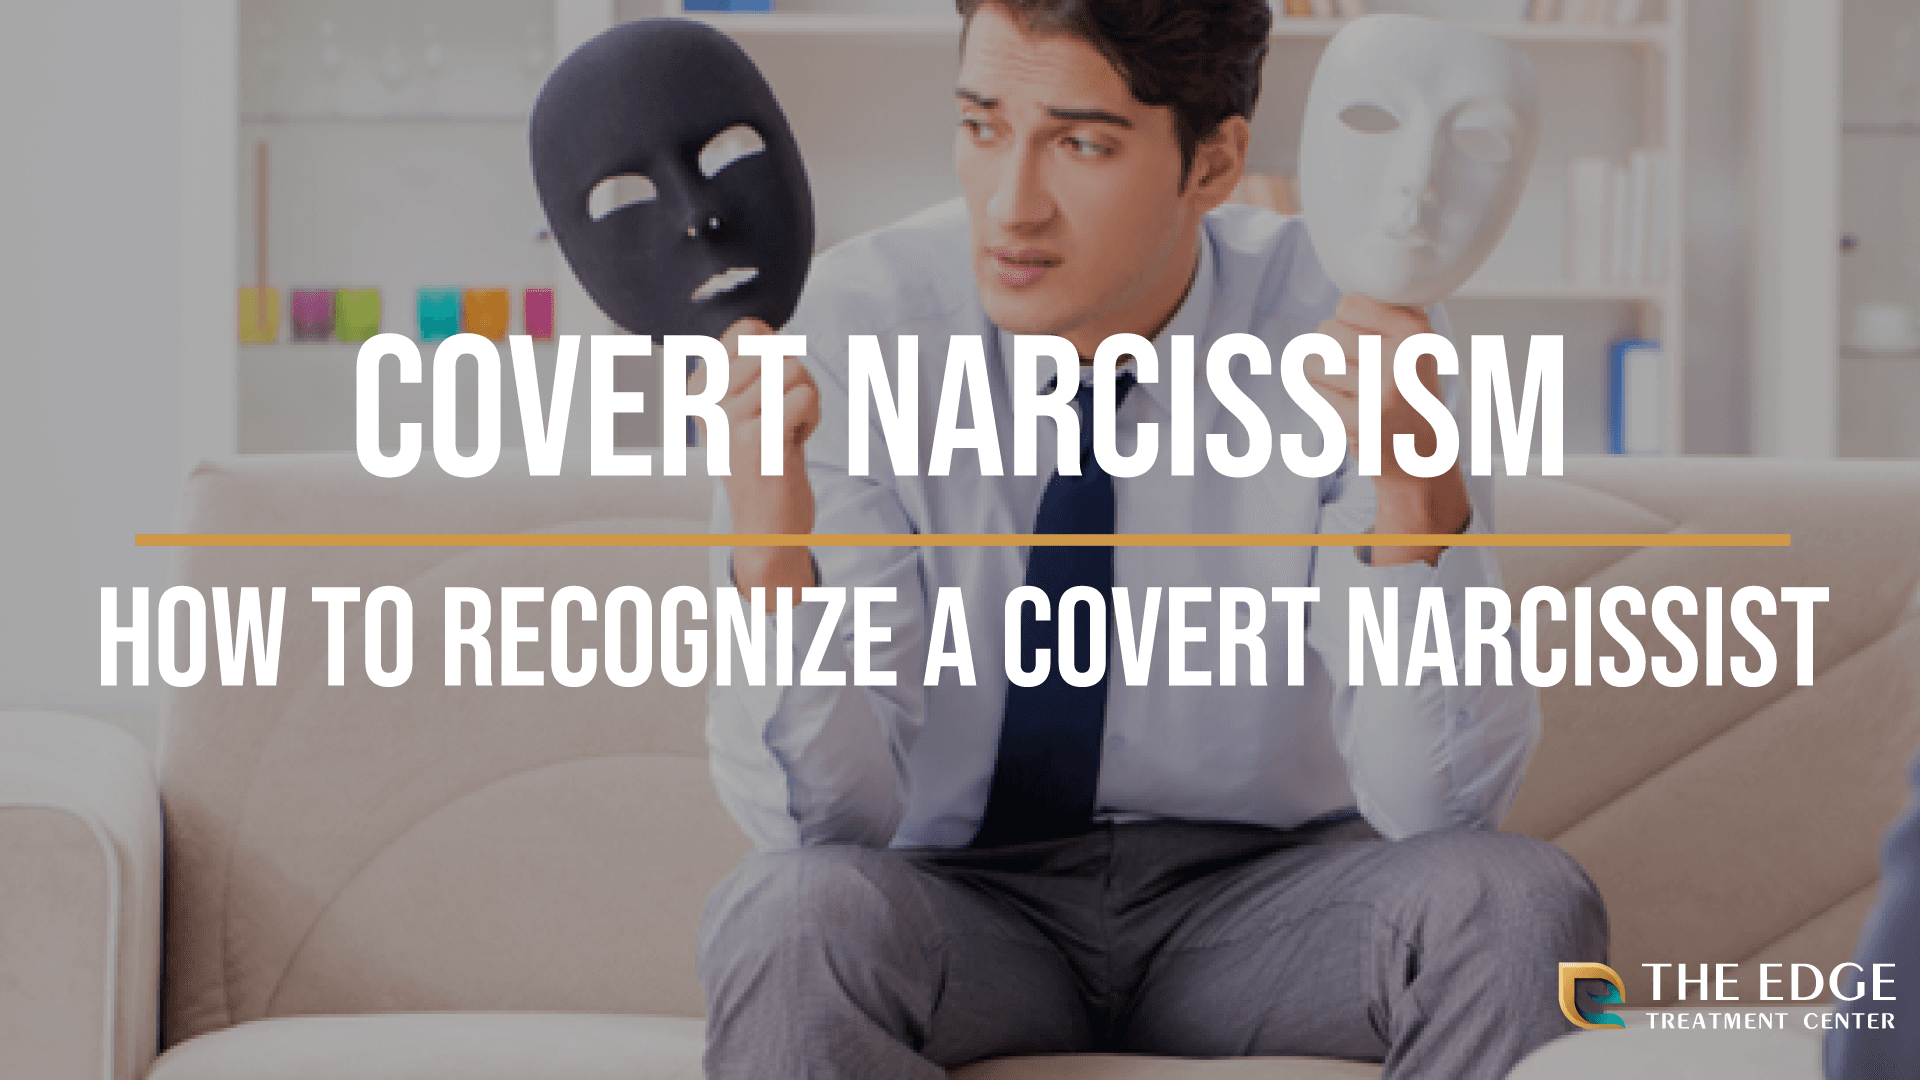 What is a Covert Narcissist?